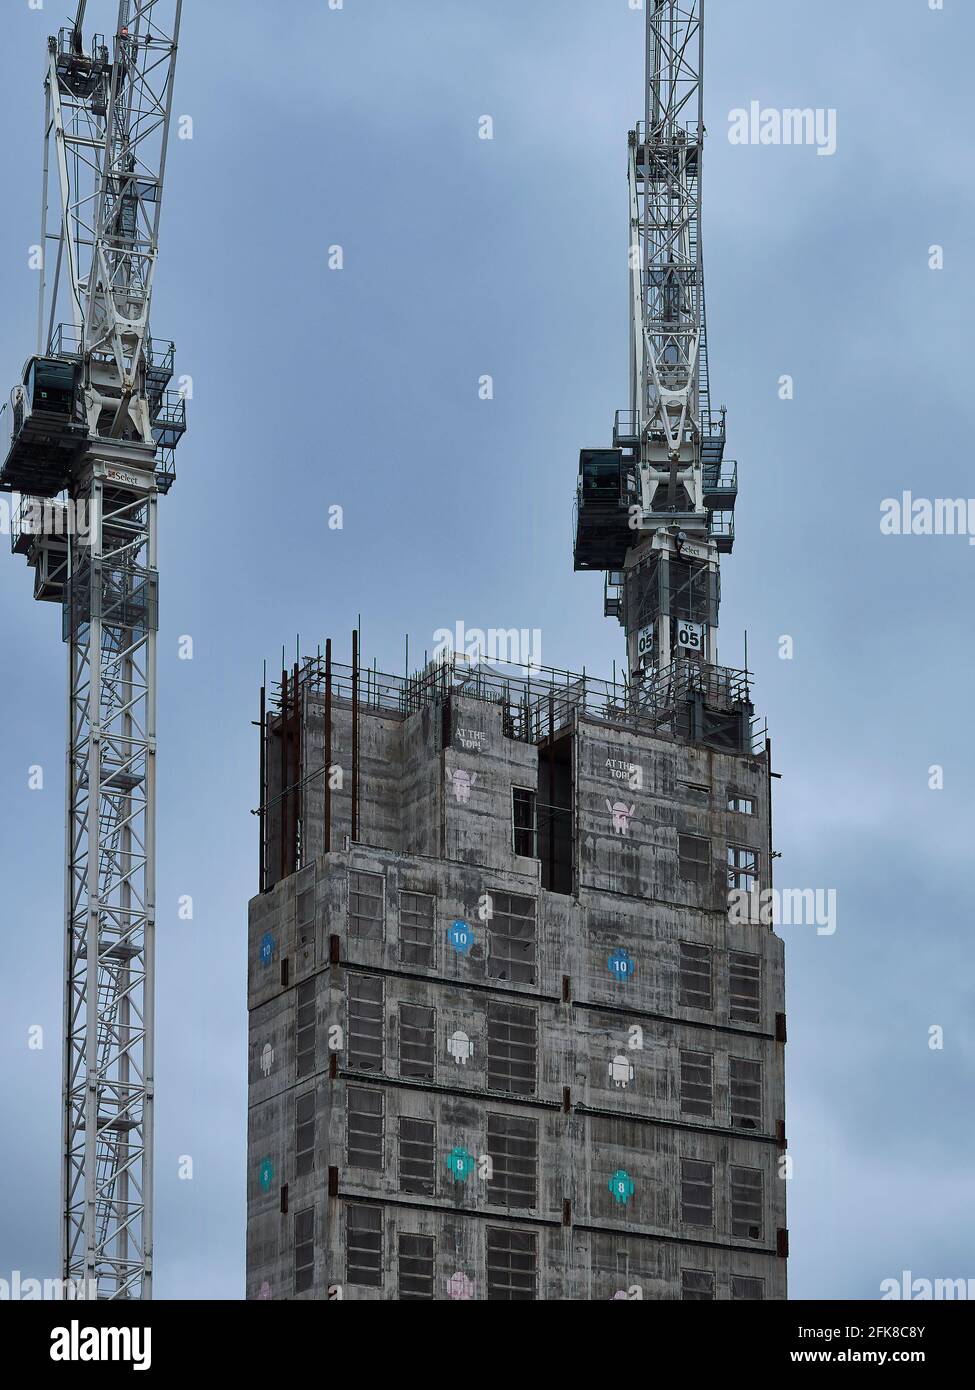 A pair of tower cranes, working to construct a central building core bearing Android logos, against an overcast grey sky. Stock Photo